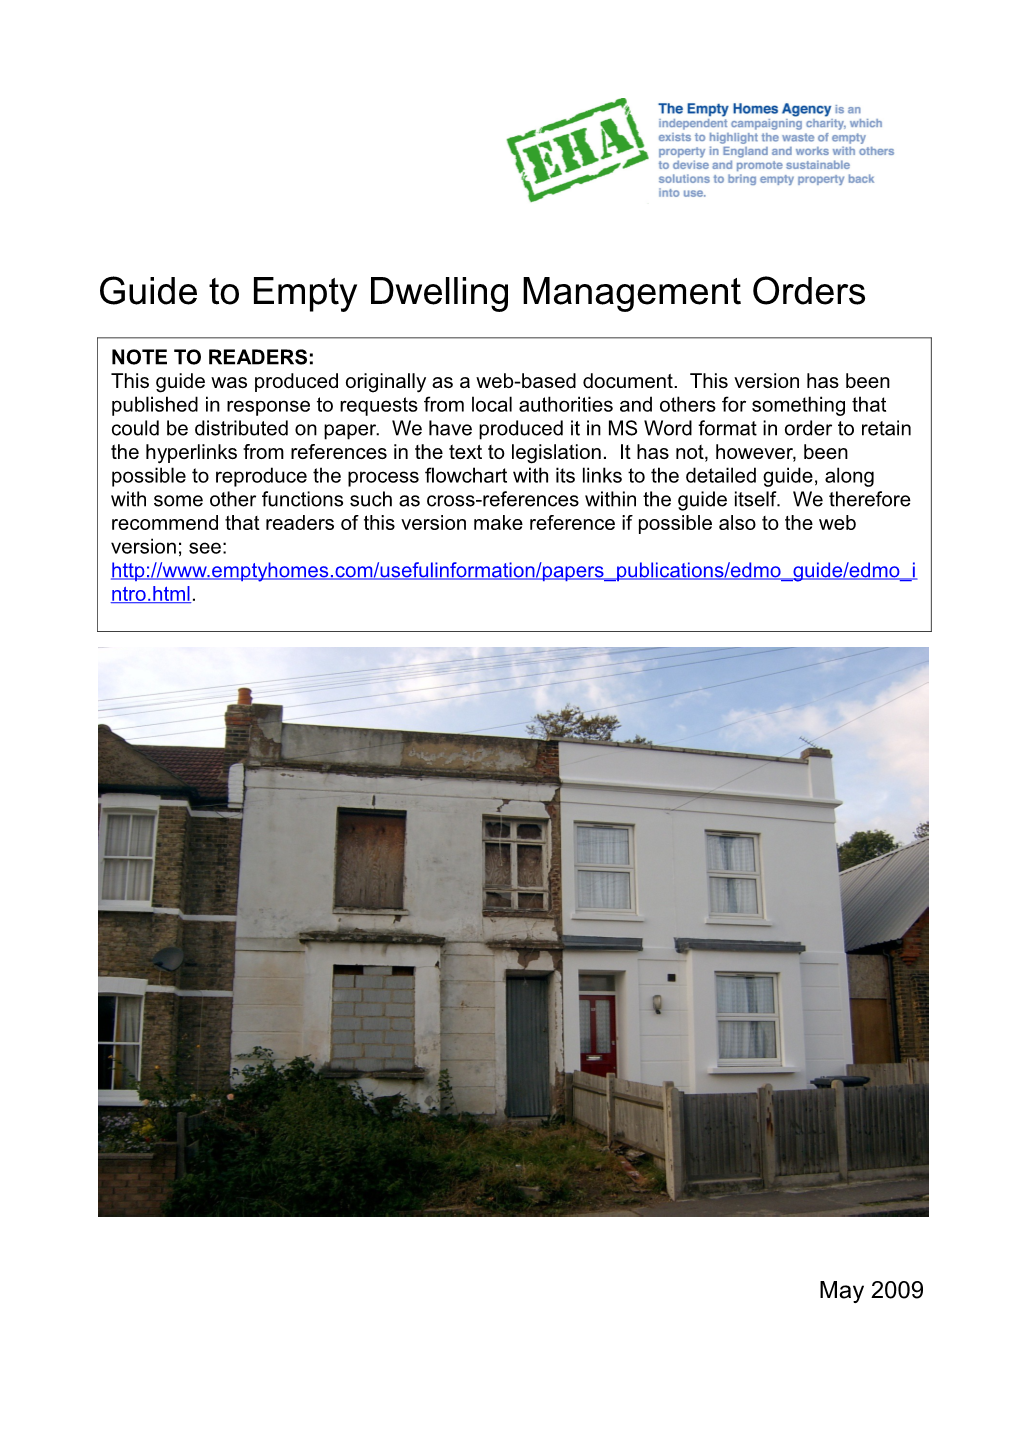 Guide to Empty Dwelling Management Orders